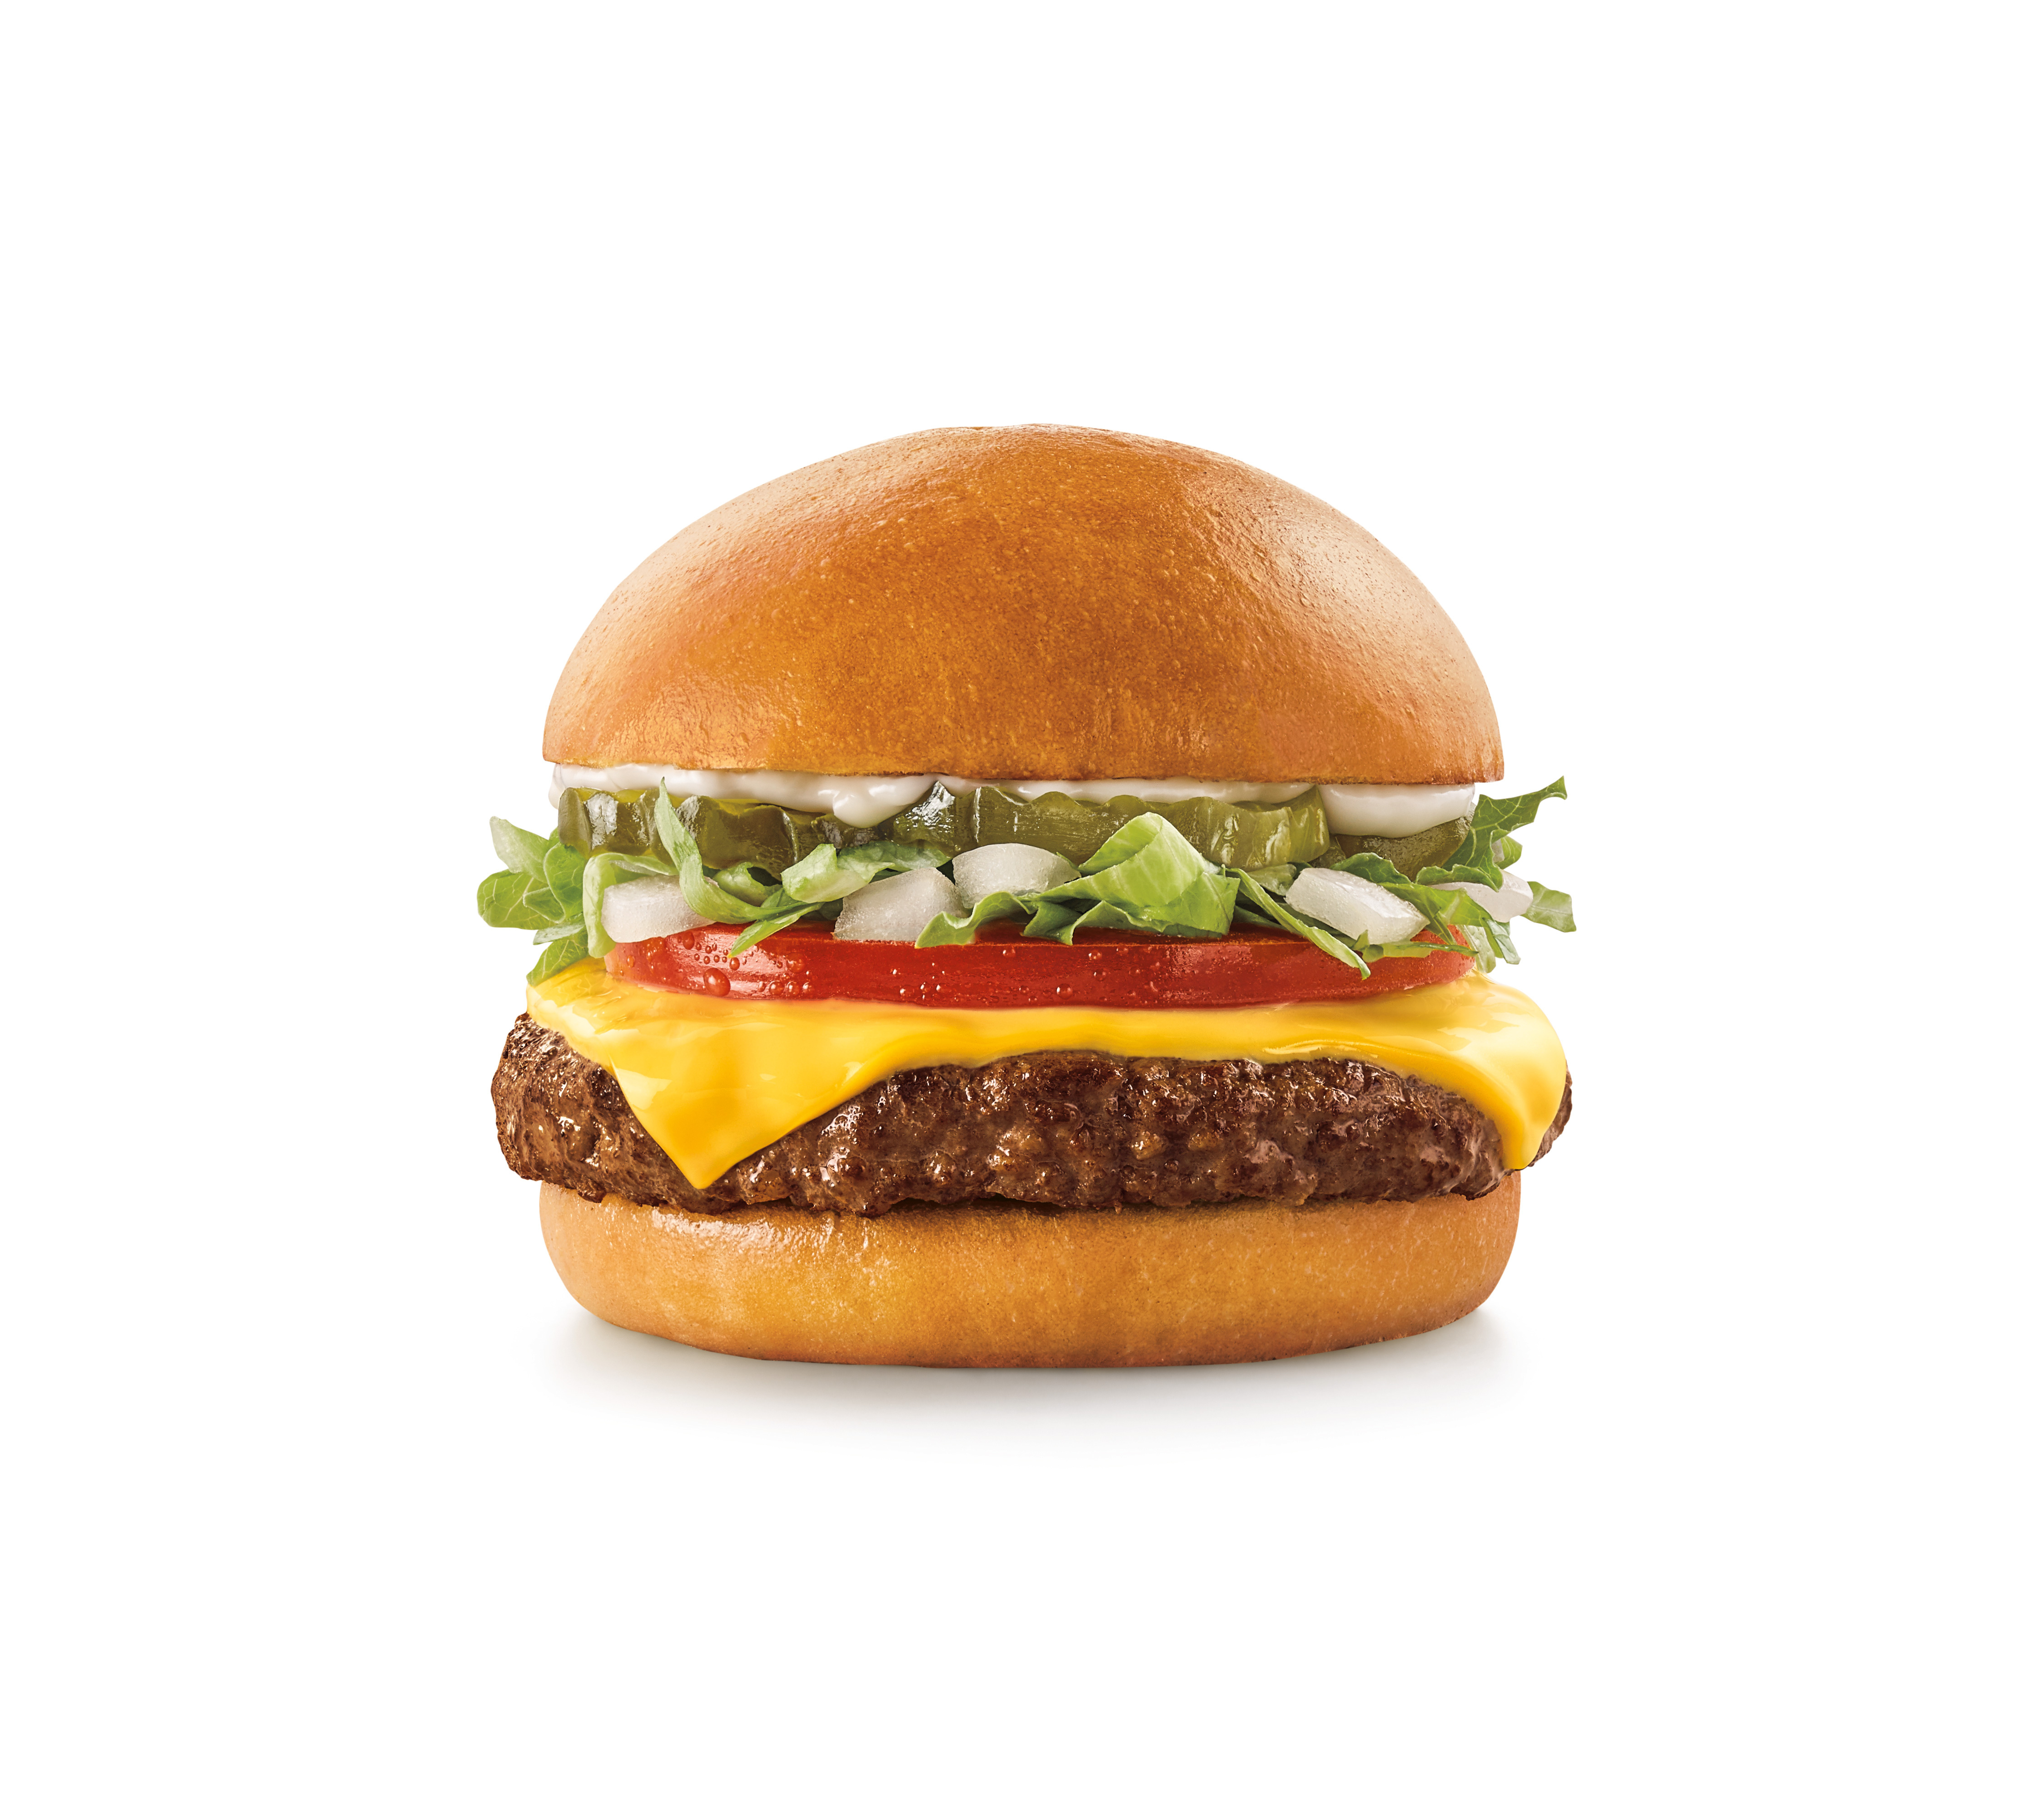 New SONIC Signature Slingers Cheeseburger Gives You All the Flavor with None of the Guilt | Business